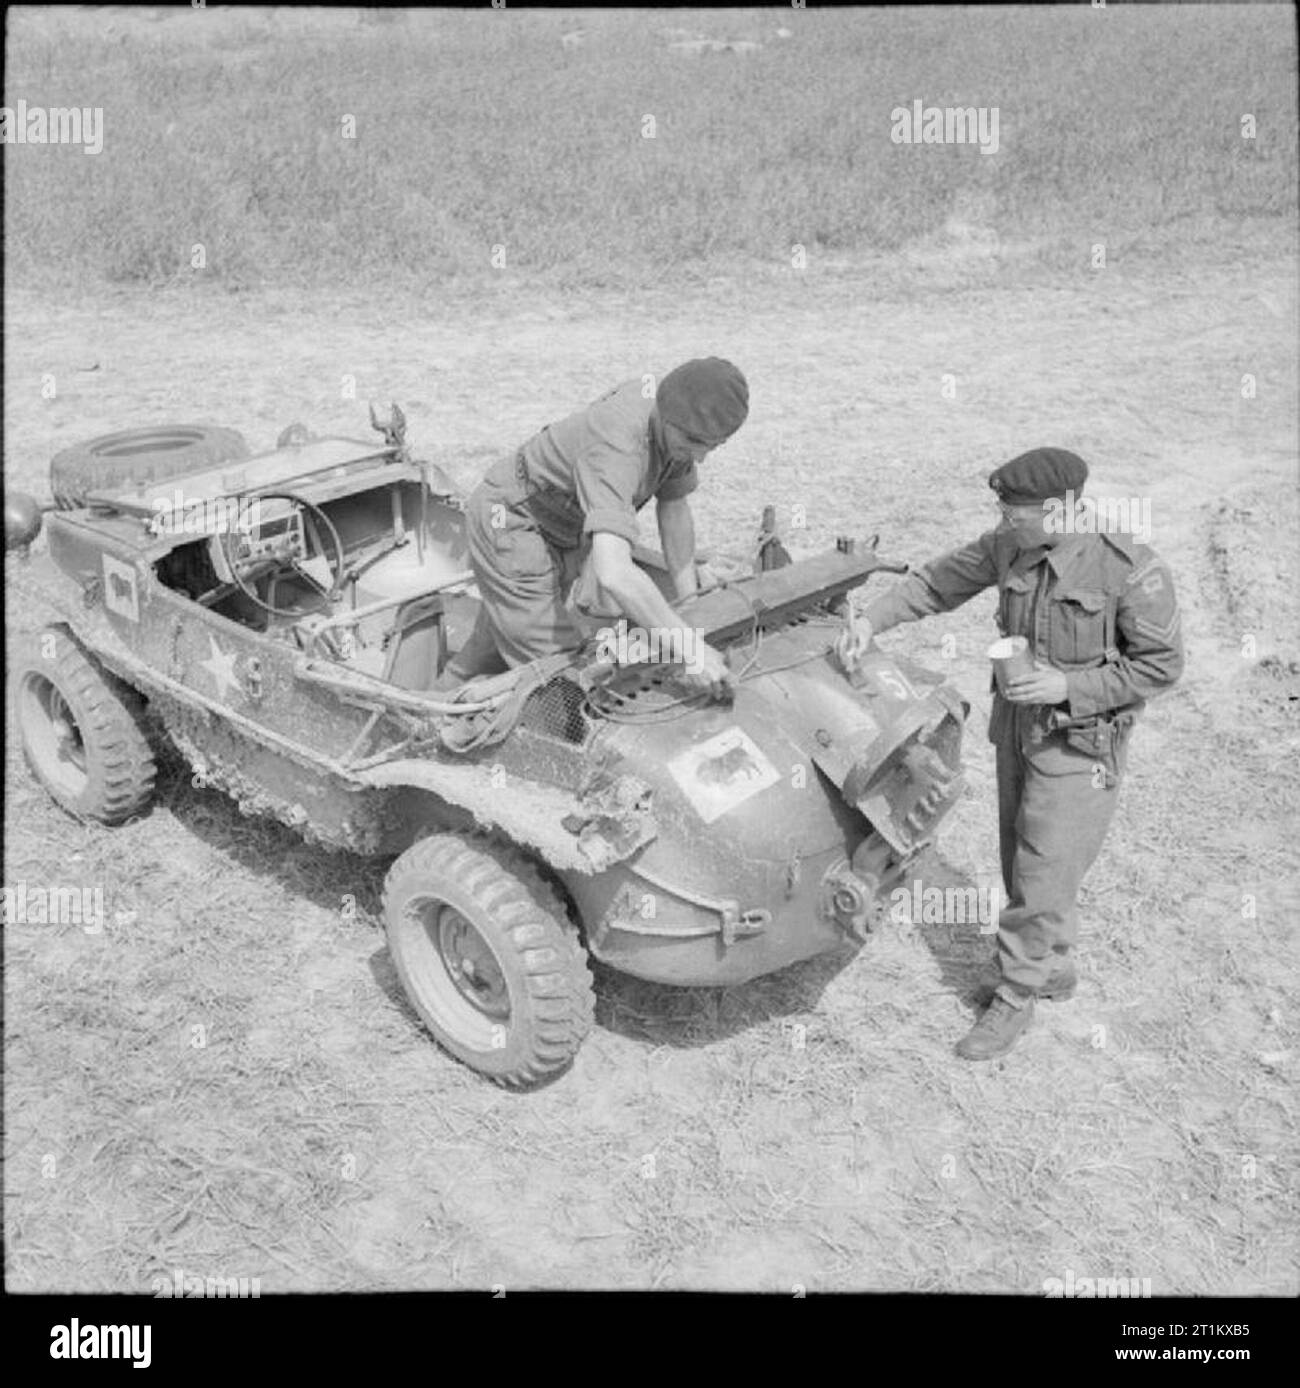 The British Army in Normandy 1944 Men of 23rd Hussars, 11th Armoured Division, painting divisional and arm of service markings on a German Schwimmwagen captured from 12th SS Panzer Division (HitlerJugend), 6 July 1944. Stock Photo